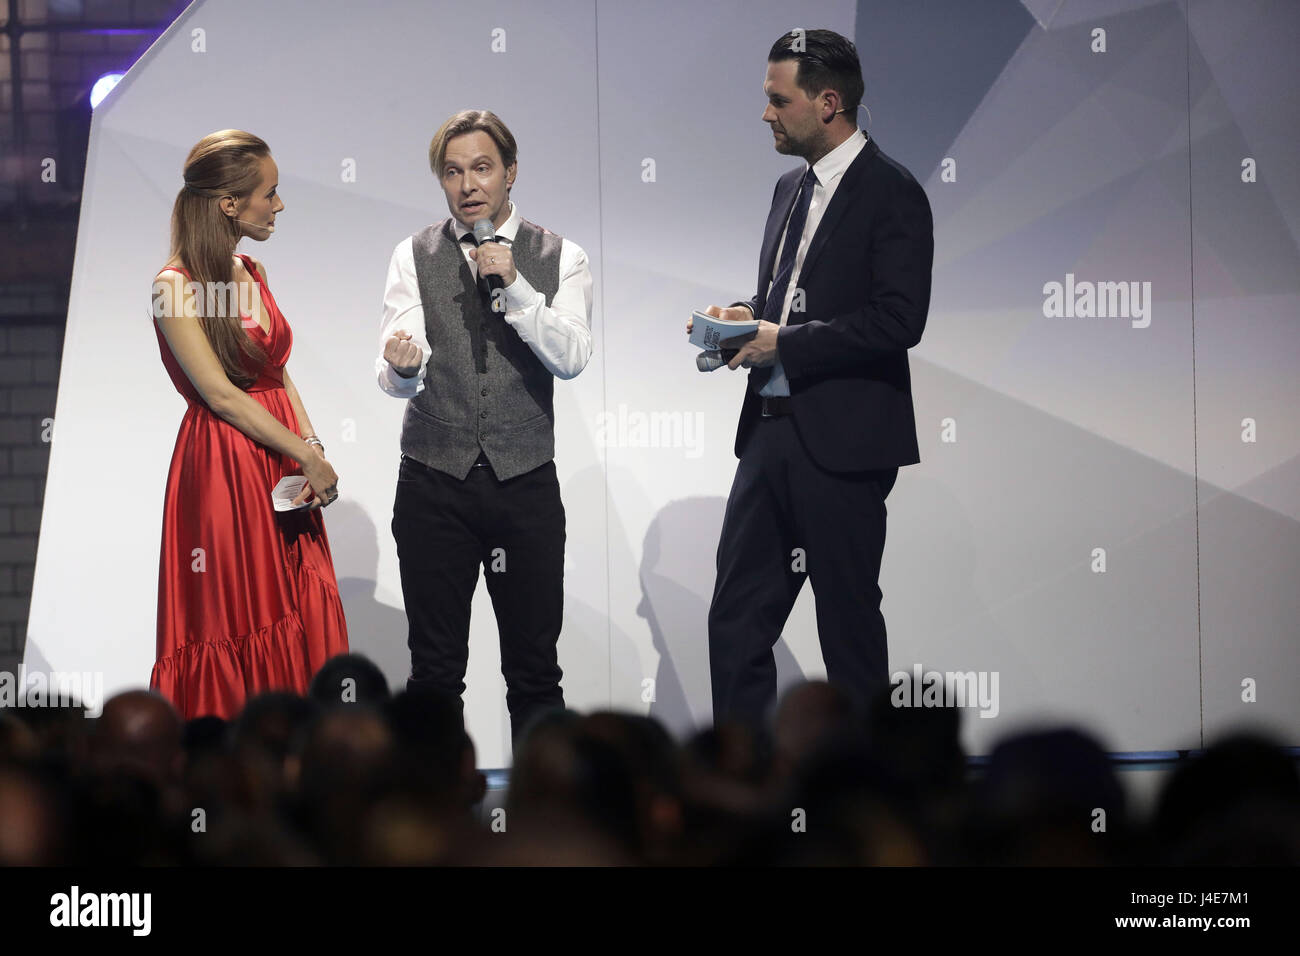 Musician Clark Datchler (c) from the band Johnny Hates Jazz on stage between presenters Annemarie Carpendale and Matthias Killing at the Green Tec Award ceremony in Berlin, Germany, 12 MAy 2017. Photo: Jörg Carstensen/dpa Stock Photo